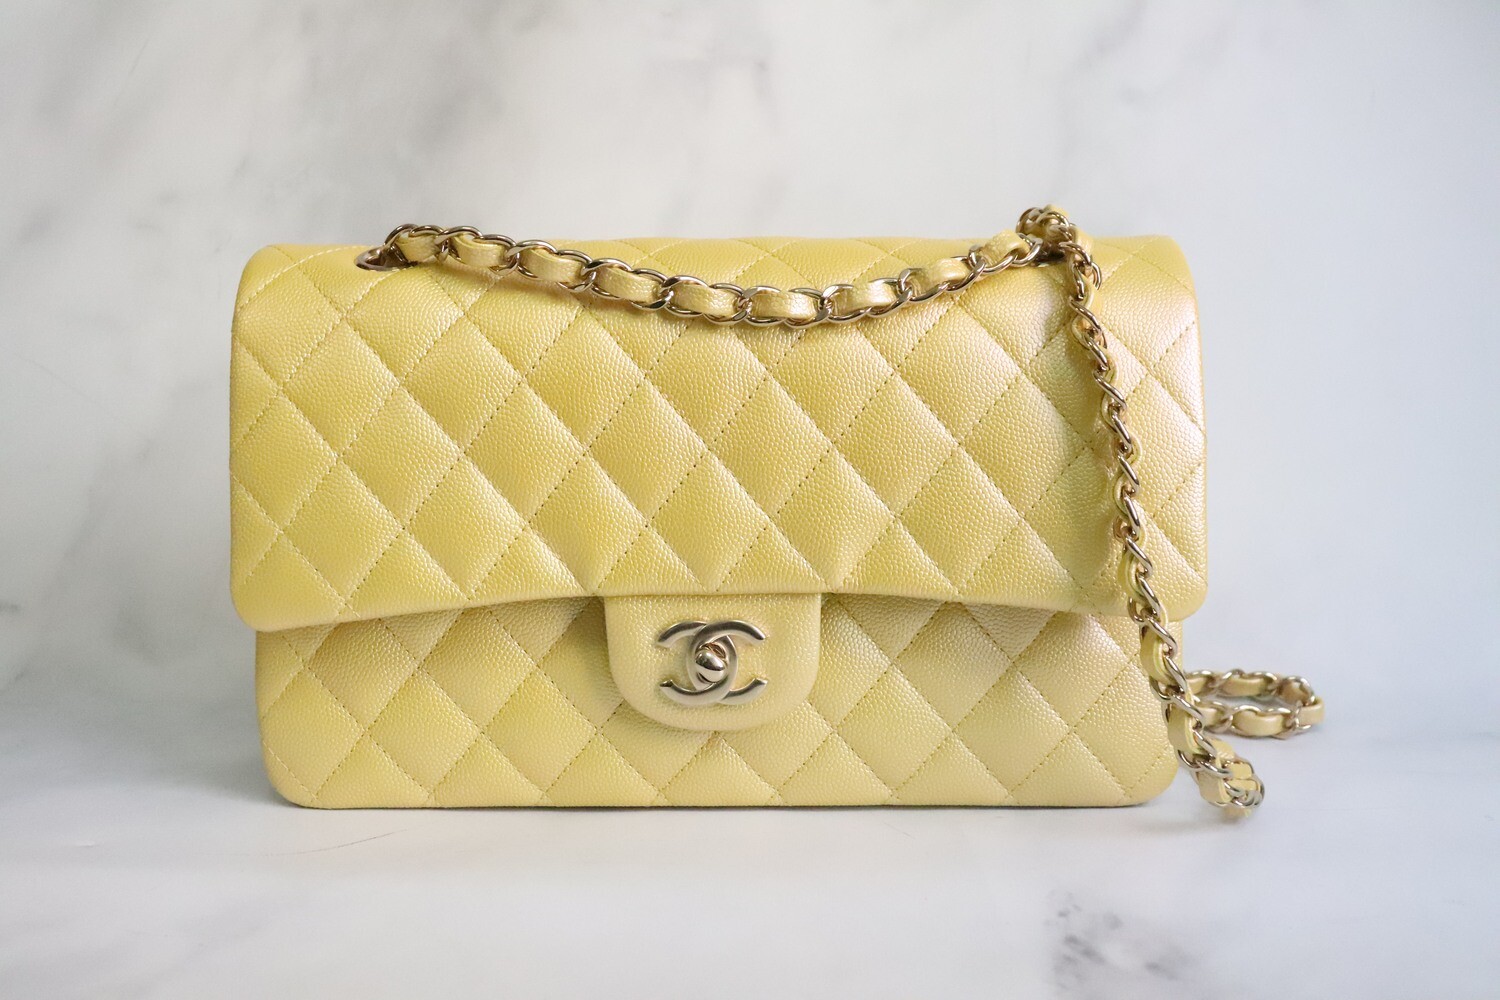 Chanel Classic Medium Double Flap, 22P Iridescent Yellow Gold Caviar  Leather, Gold Hardware, New in Box